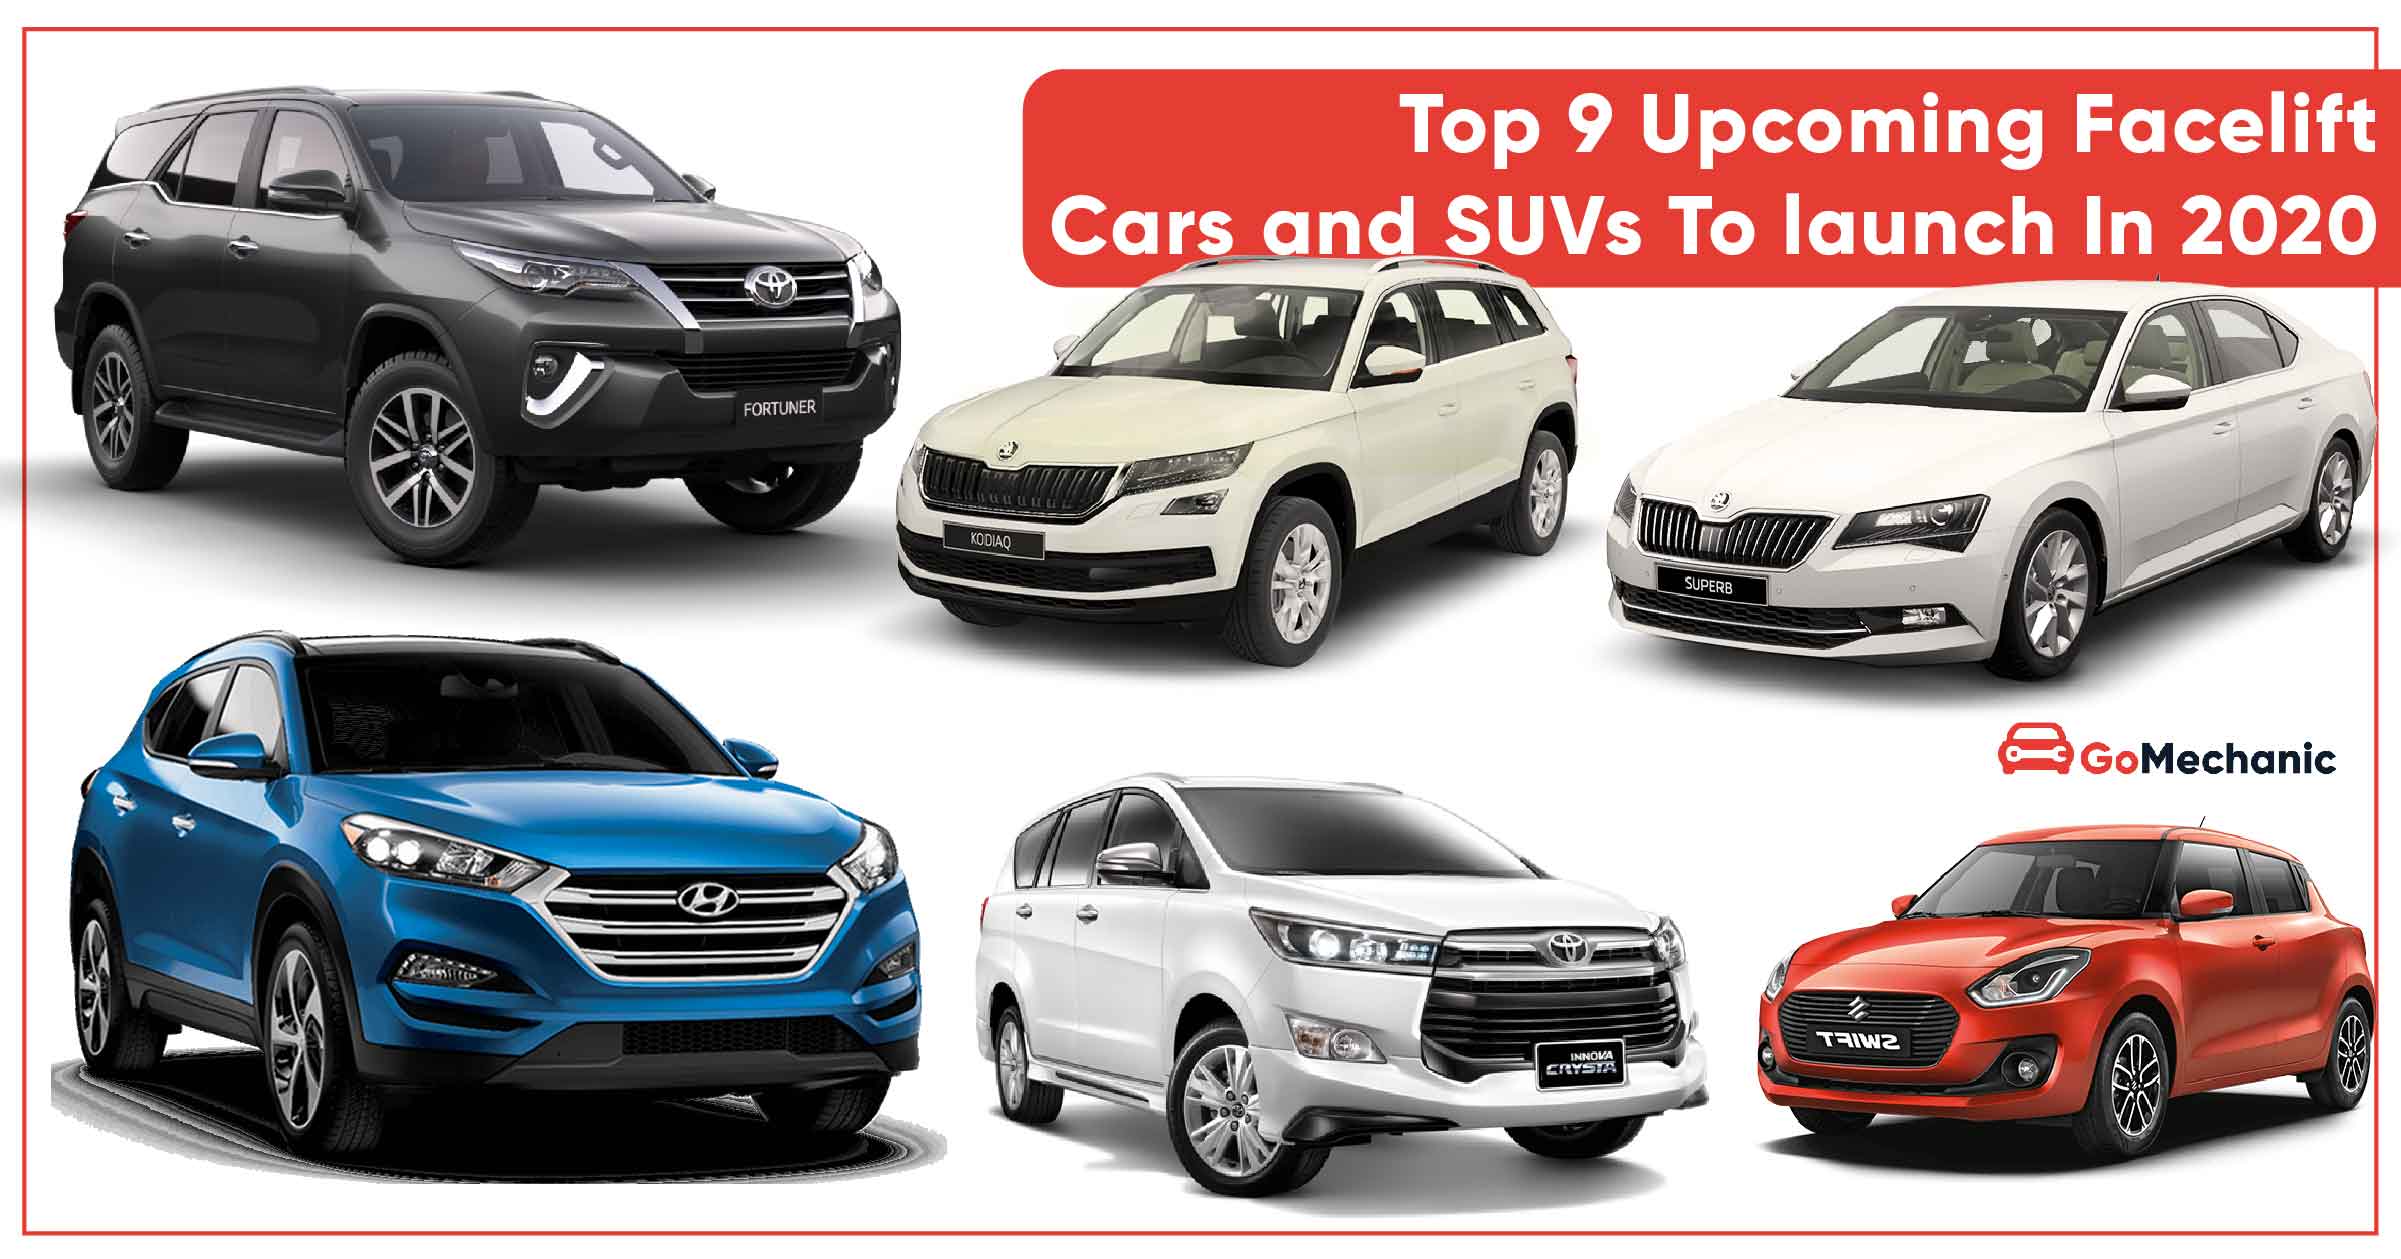 Top 9 Upcoming Facelift Cars and SUVs to launch In 2020